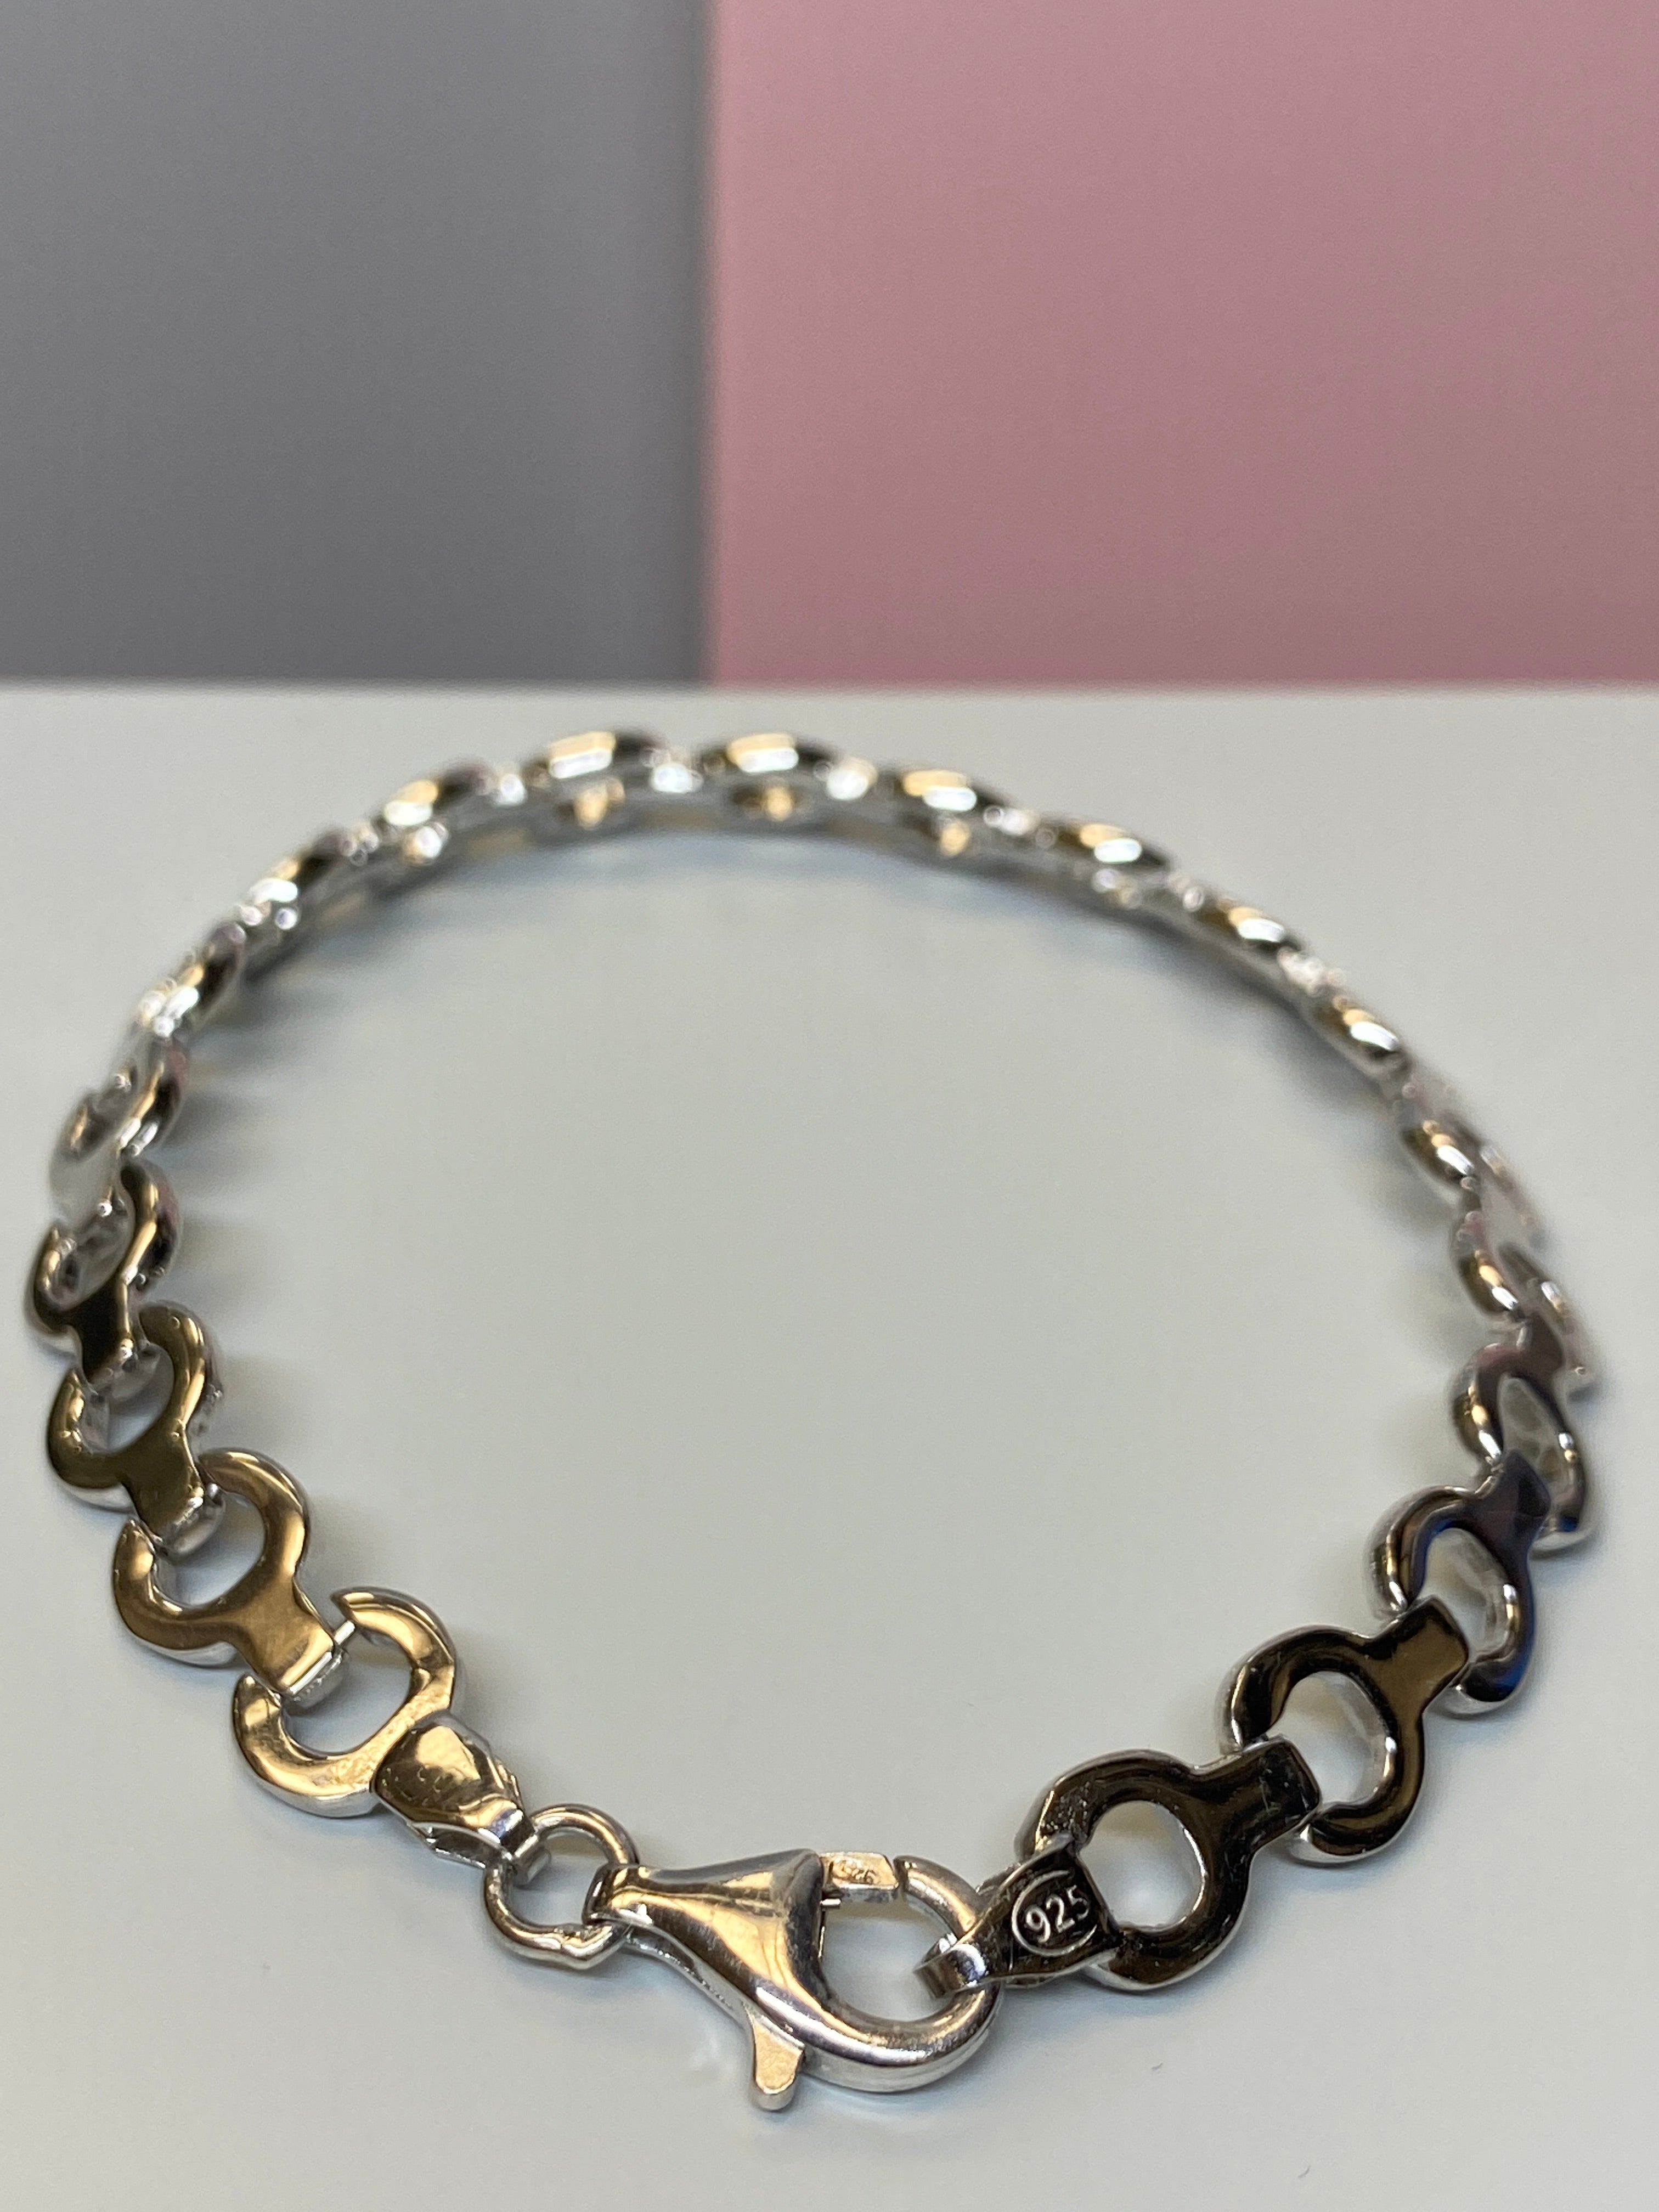 Silver Patterned Bracelet - Hallmark Jewellers Formby & The Jewellers Bench Widnes